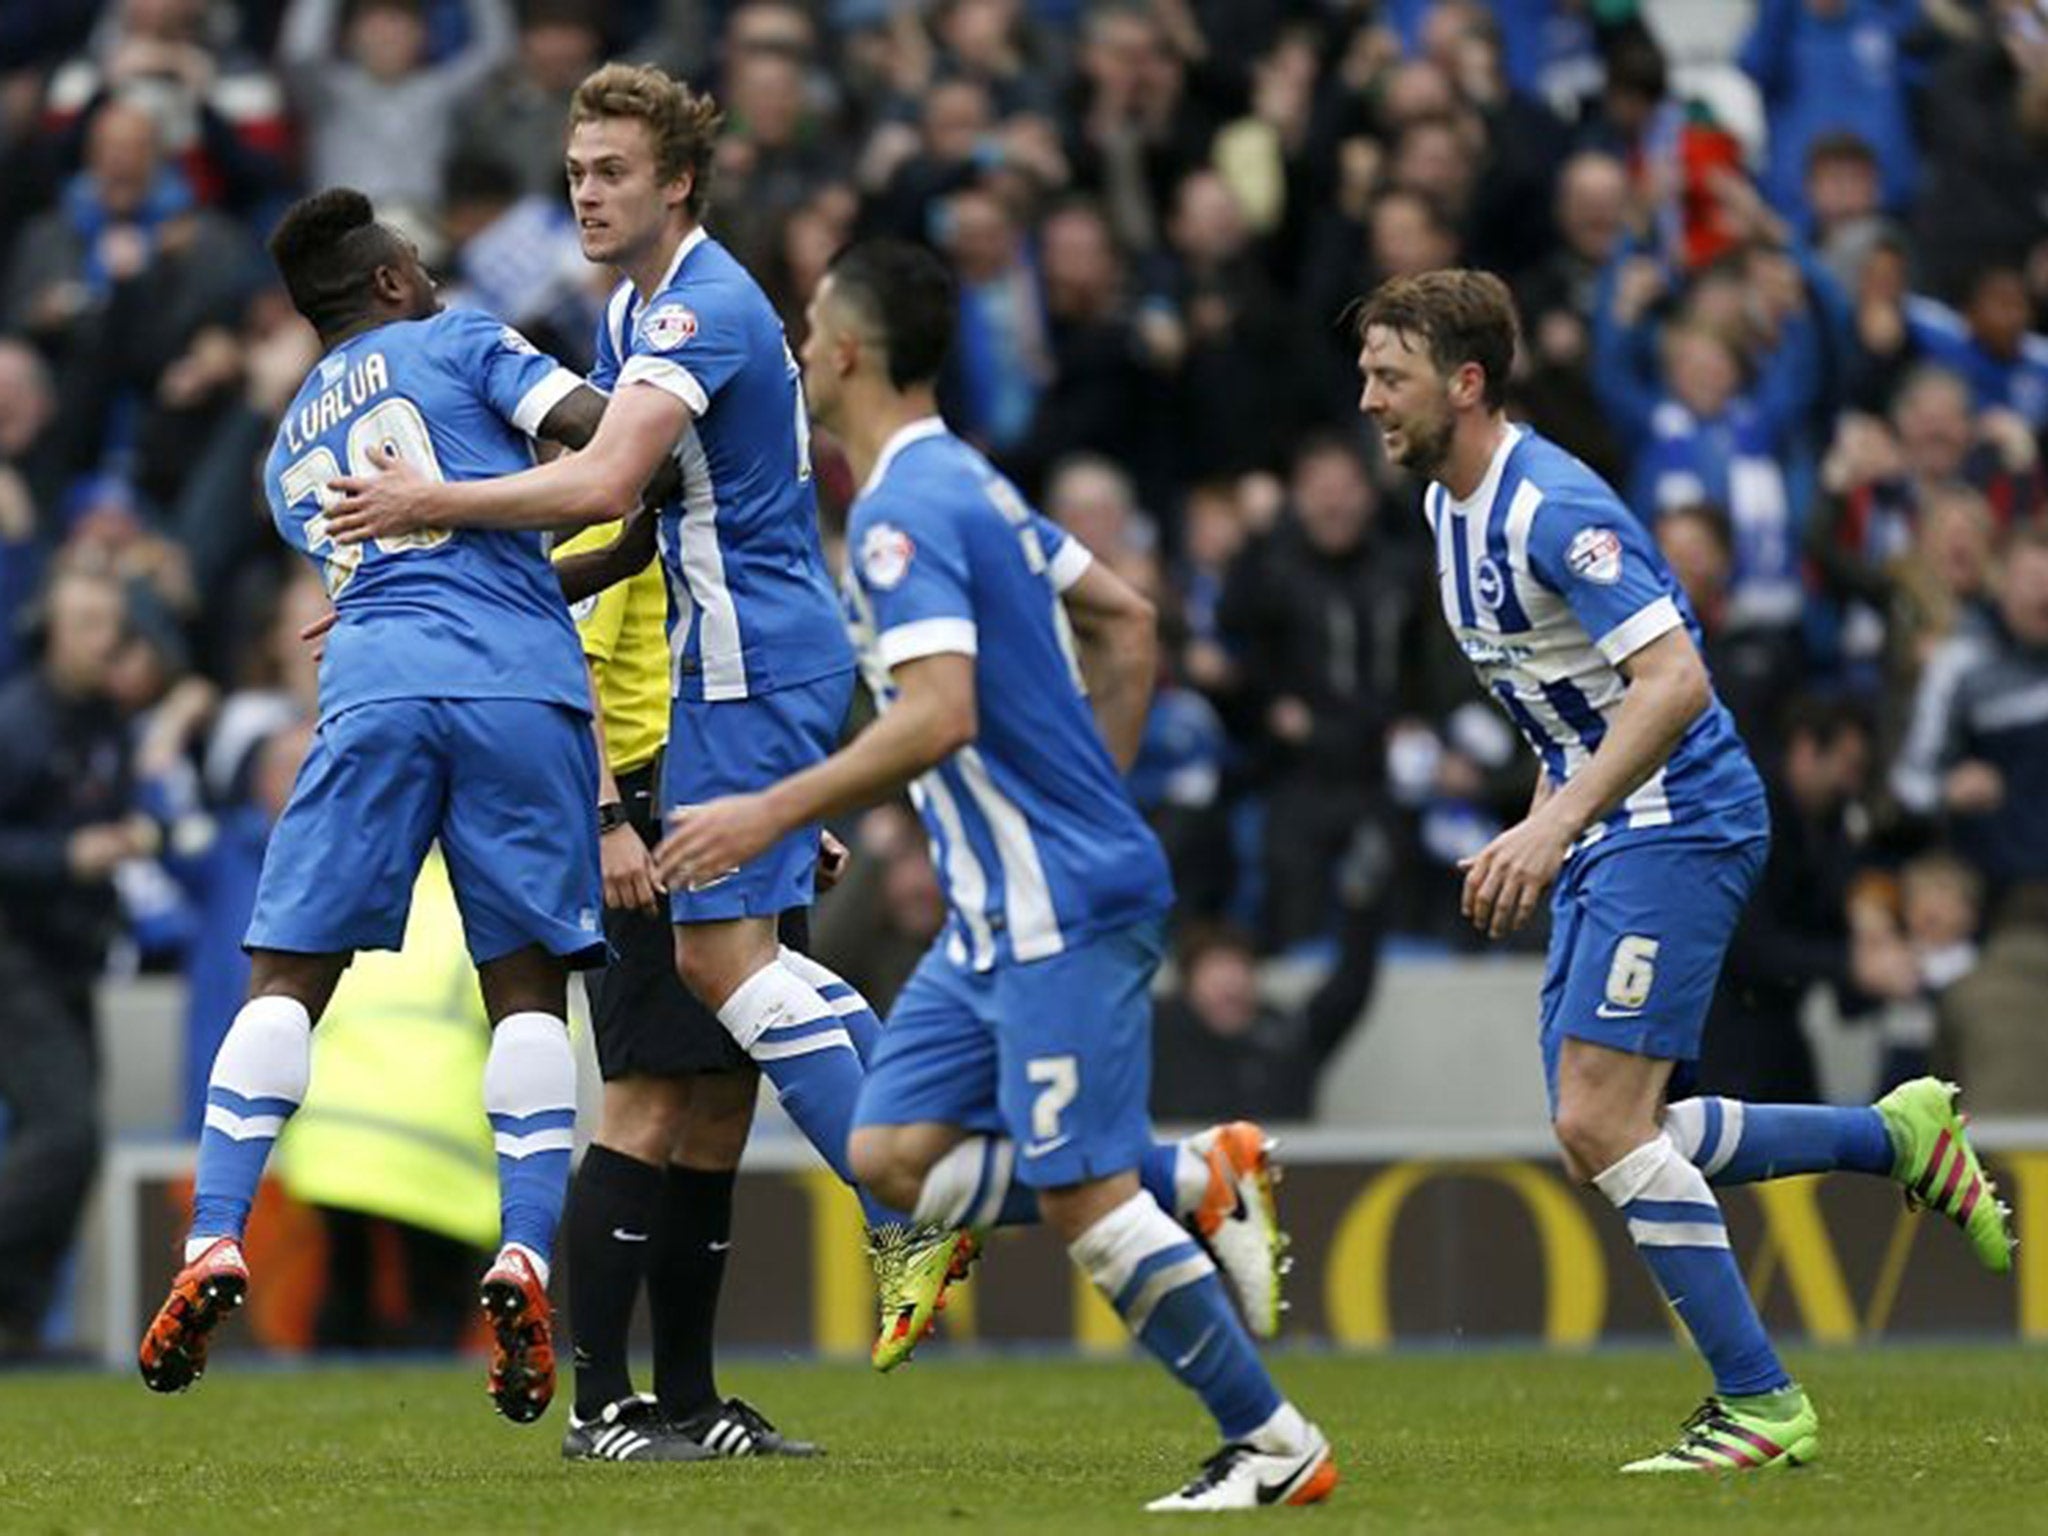 James Wilson celebrates after scoring a late equaliser for Brighton & Hove Albion